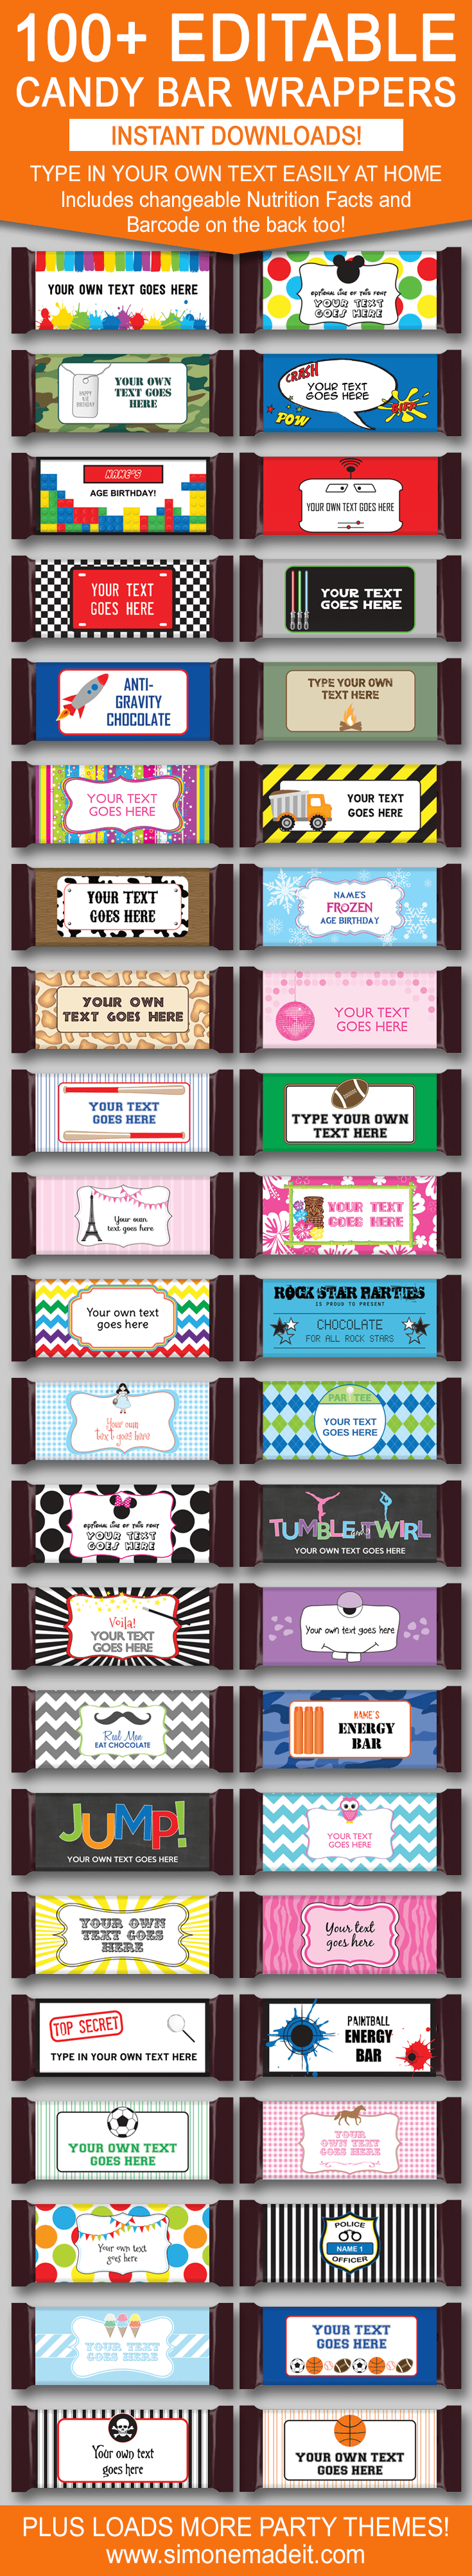 DIY Candy Bar Wrapper Templates | Birthday Party Favors | 1.55oz Hershey Candy Bars | Personalized Candy Bar Wrappers | Chocolate Bar Labels | INSTANT DOWNLOAD $3.00 via simonemadeit.com